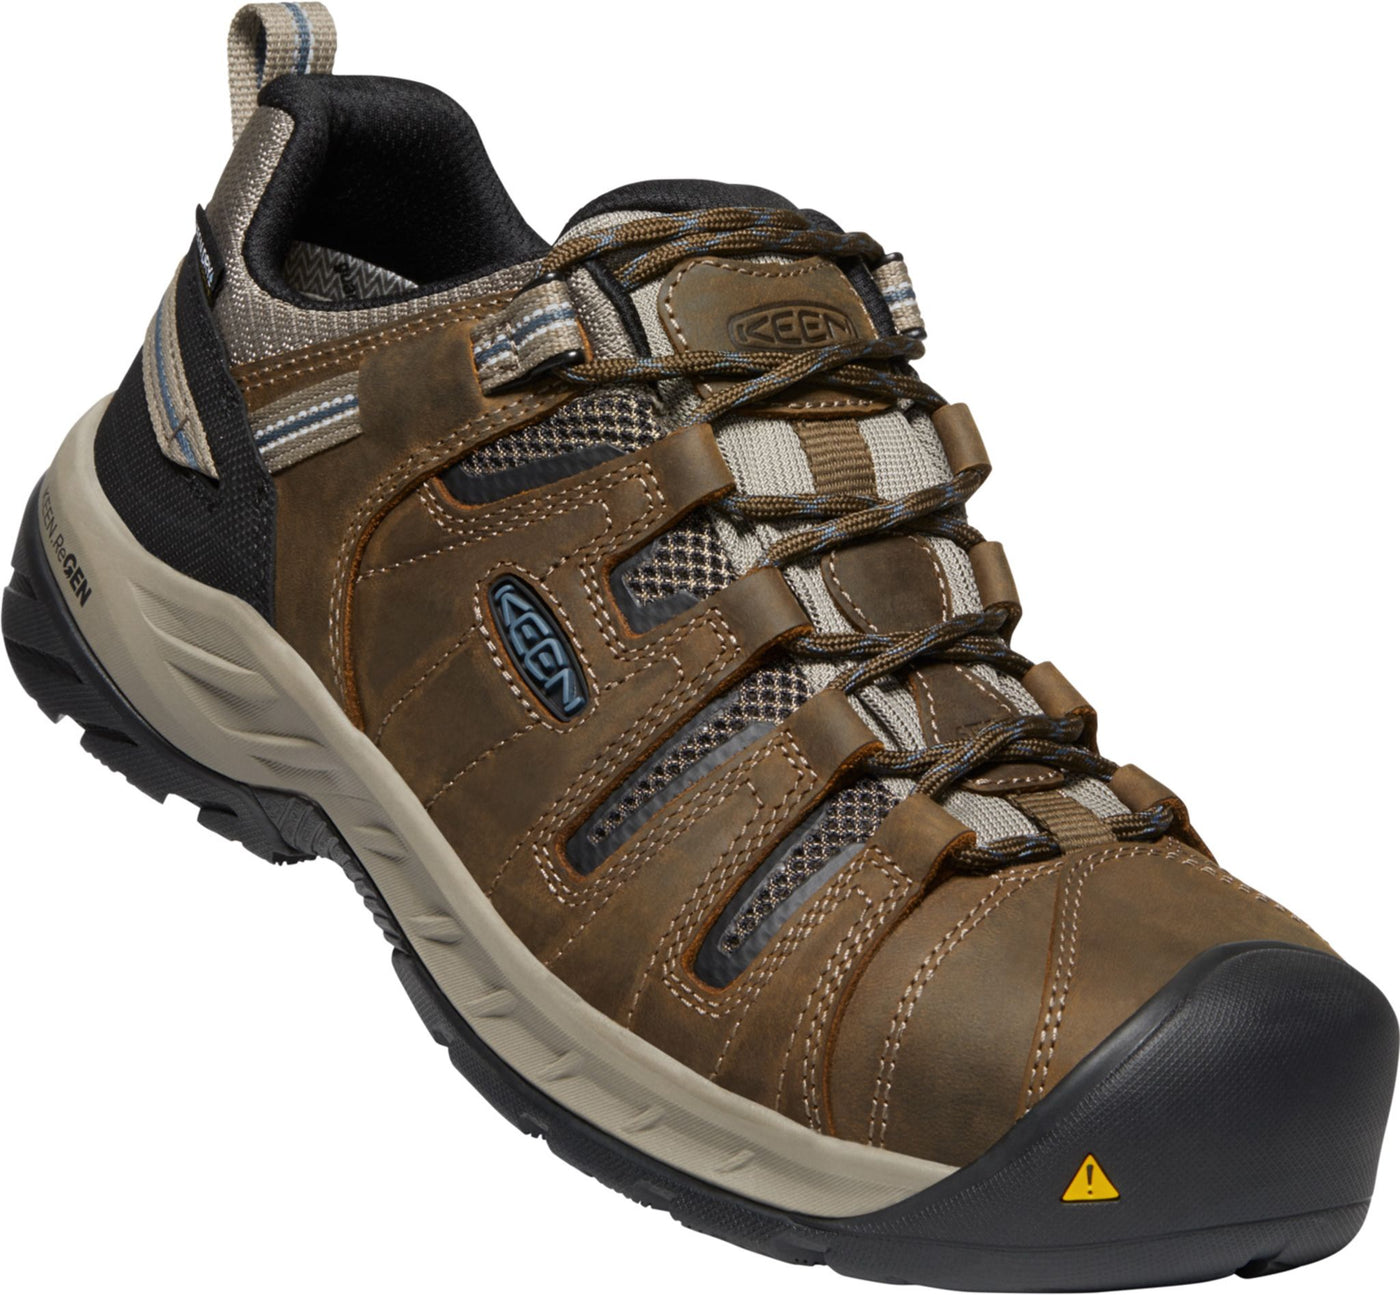 waterproof safety toe shoes